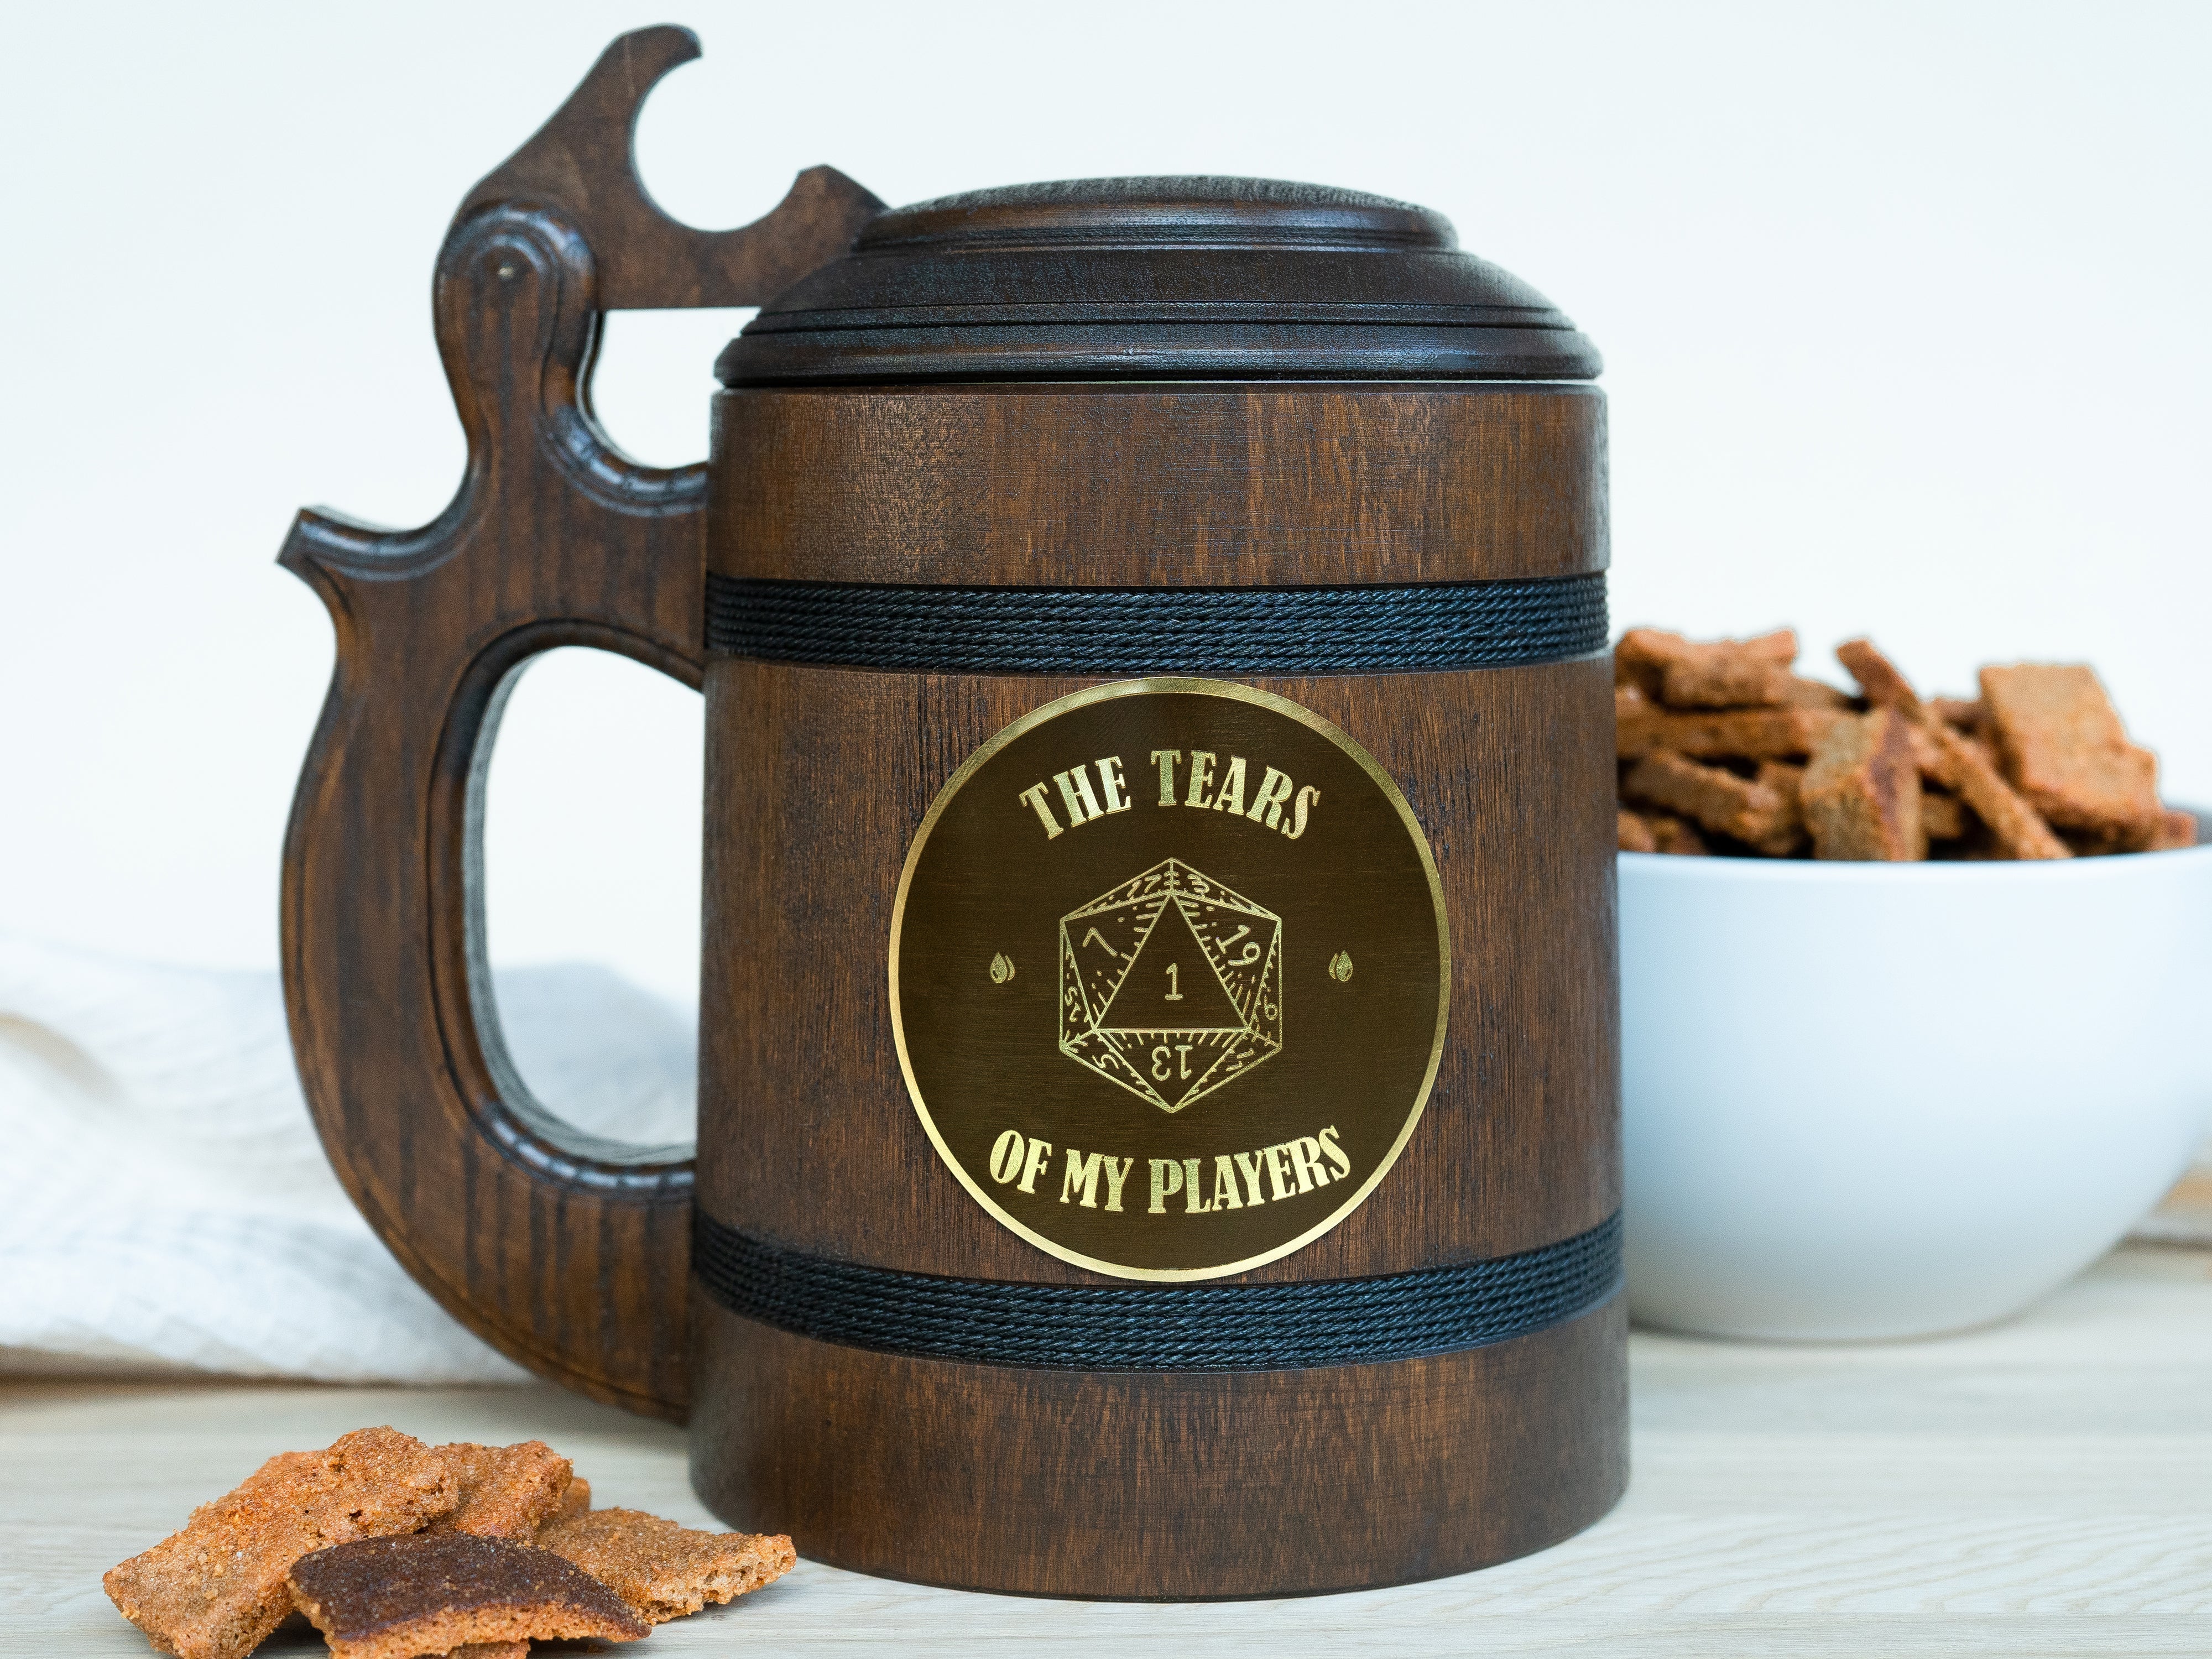 Dungeon Master beer mug with lid "The tears of my players", DND Mugs - GravisCup